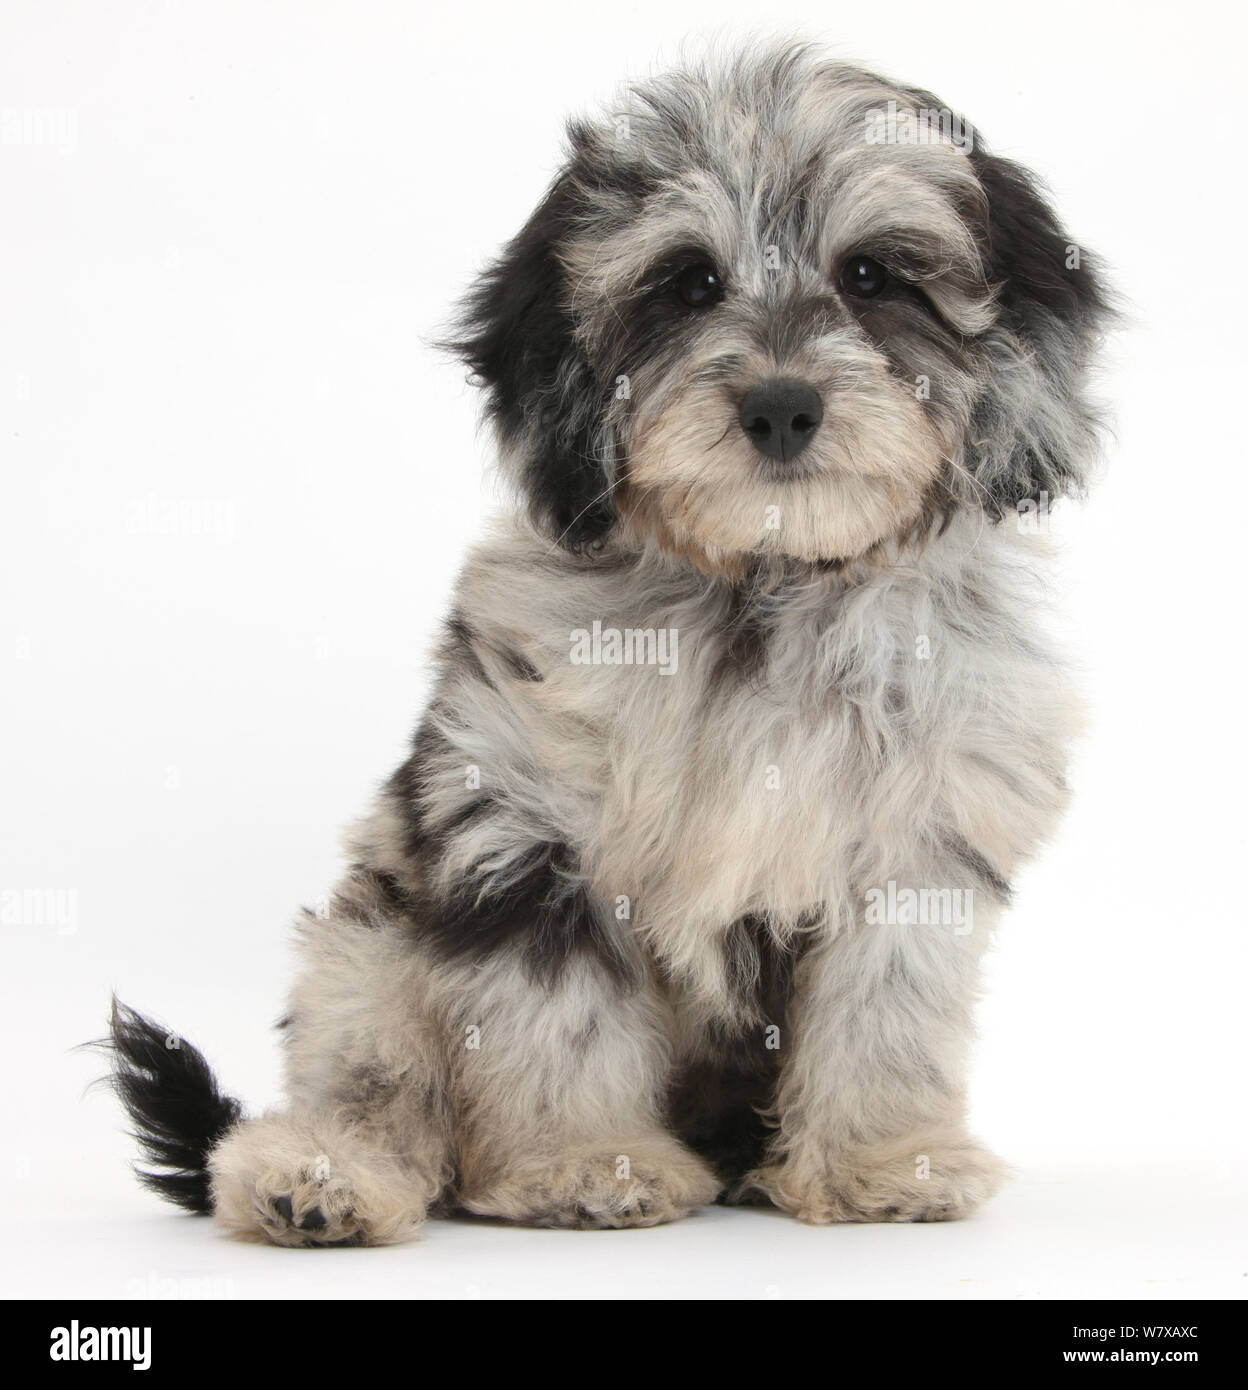 Black and grey Daschund x Poodle cross, 'Daxie doodle' puppy. Stock Photo